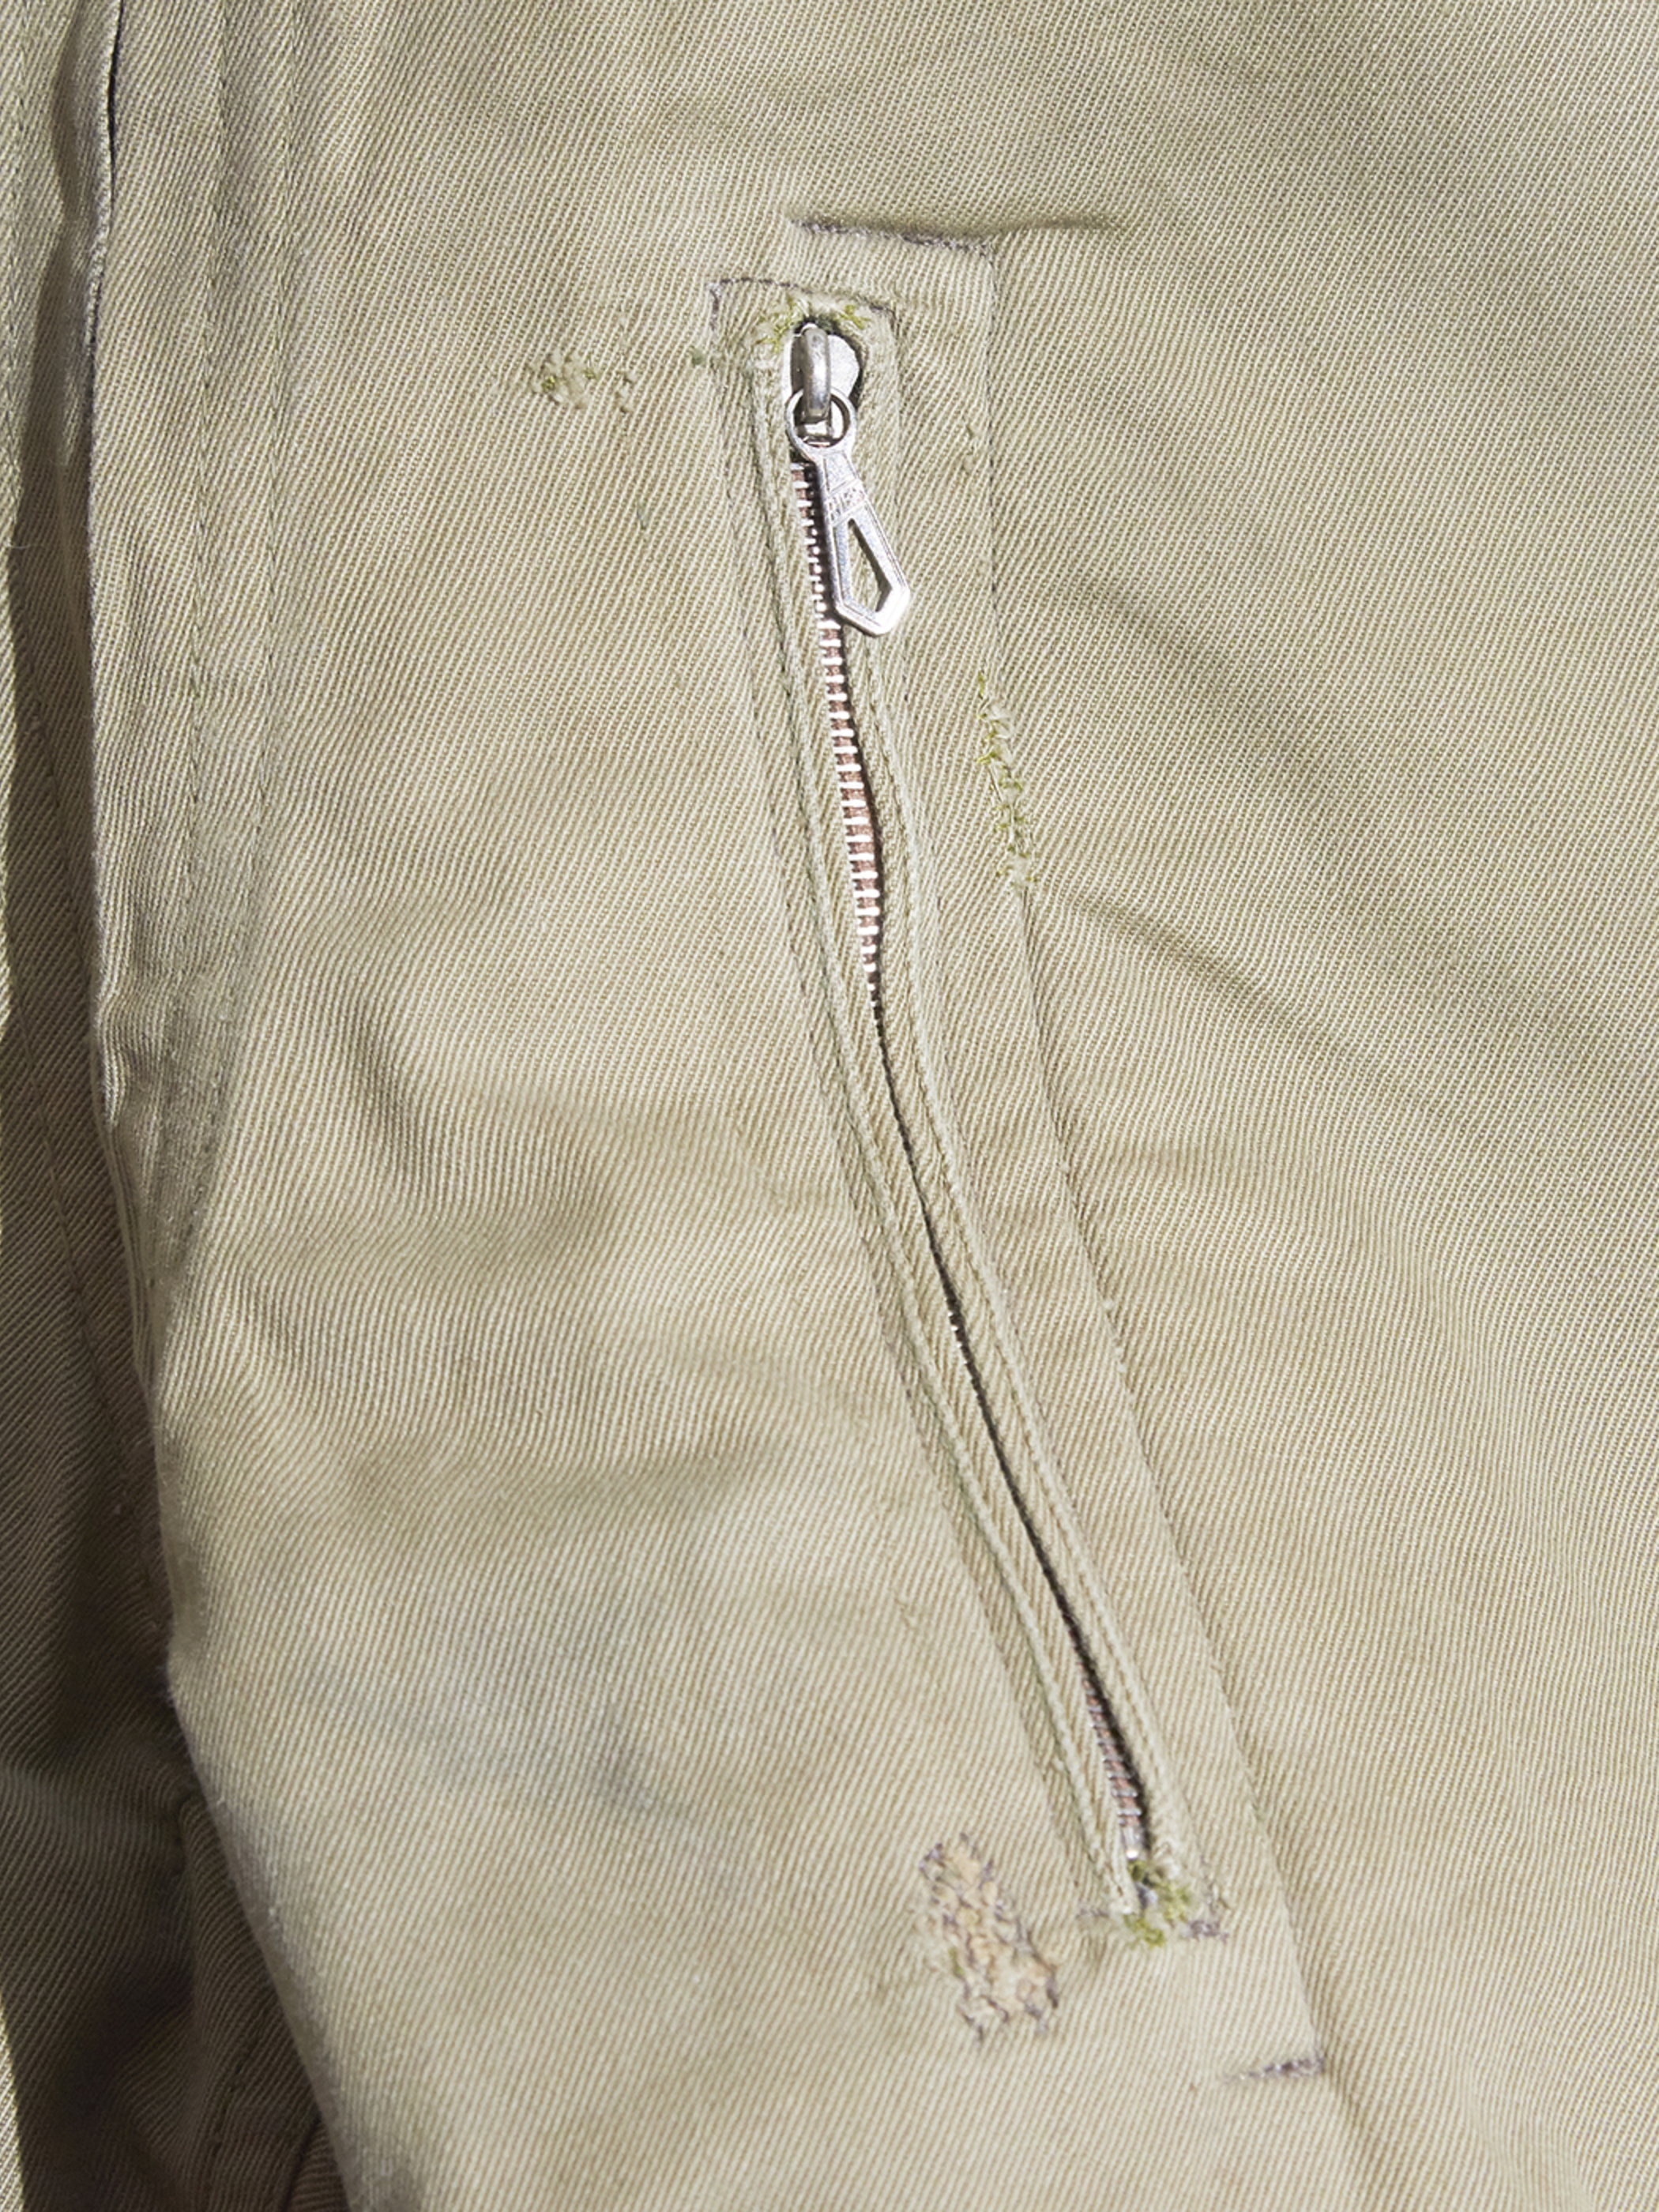 1940s "US ARMY" tankers overall -KHAKI-